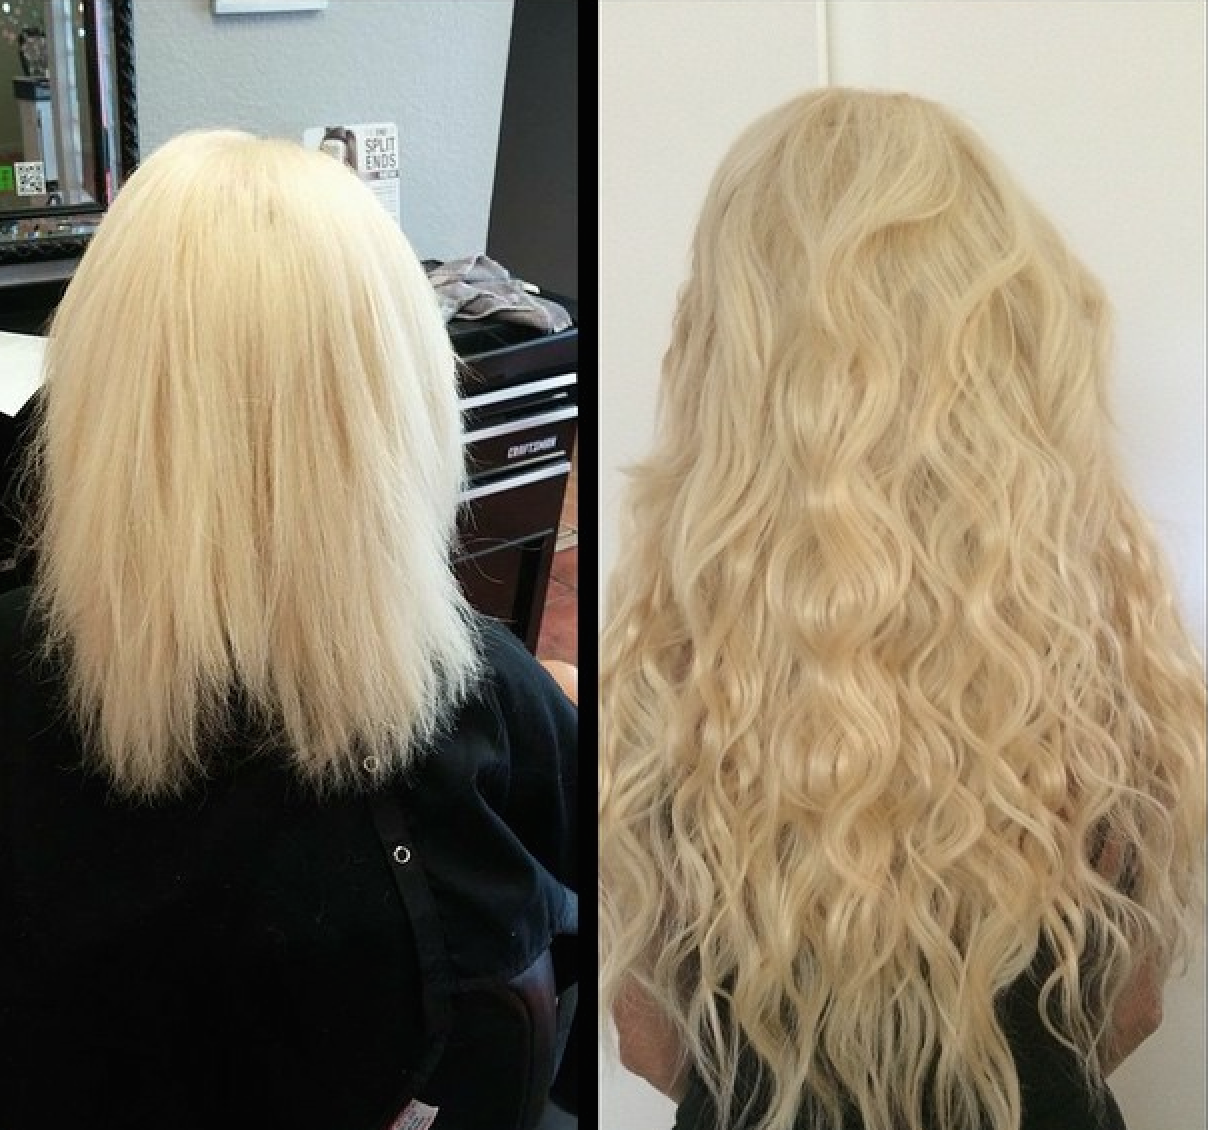 Clip In Hair Extensions For Thin Hair Before And After : Before & After